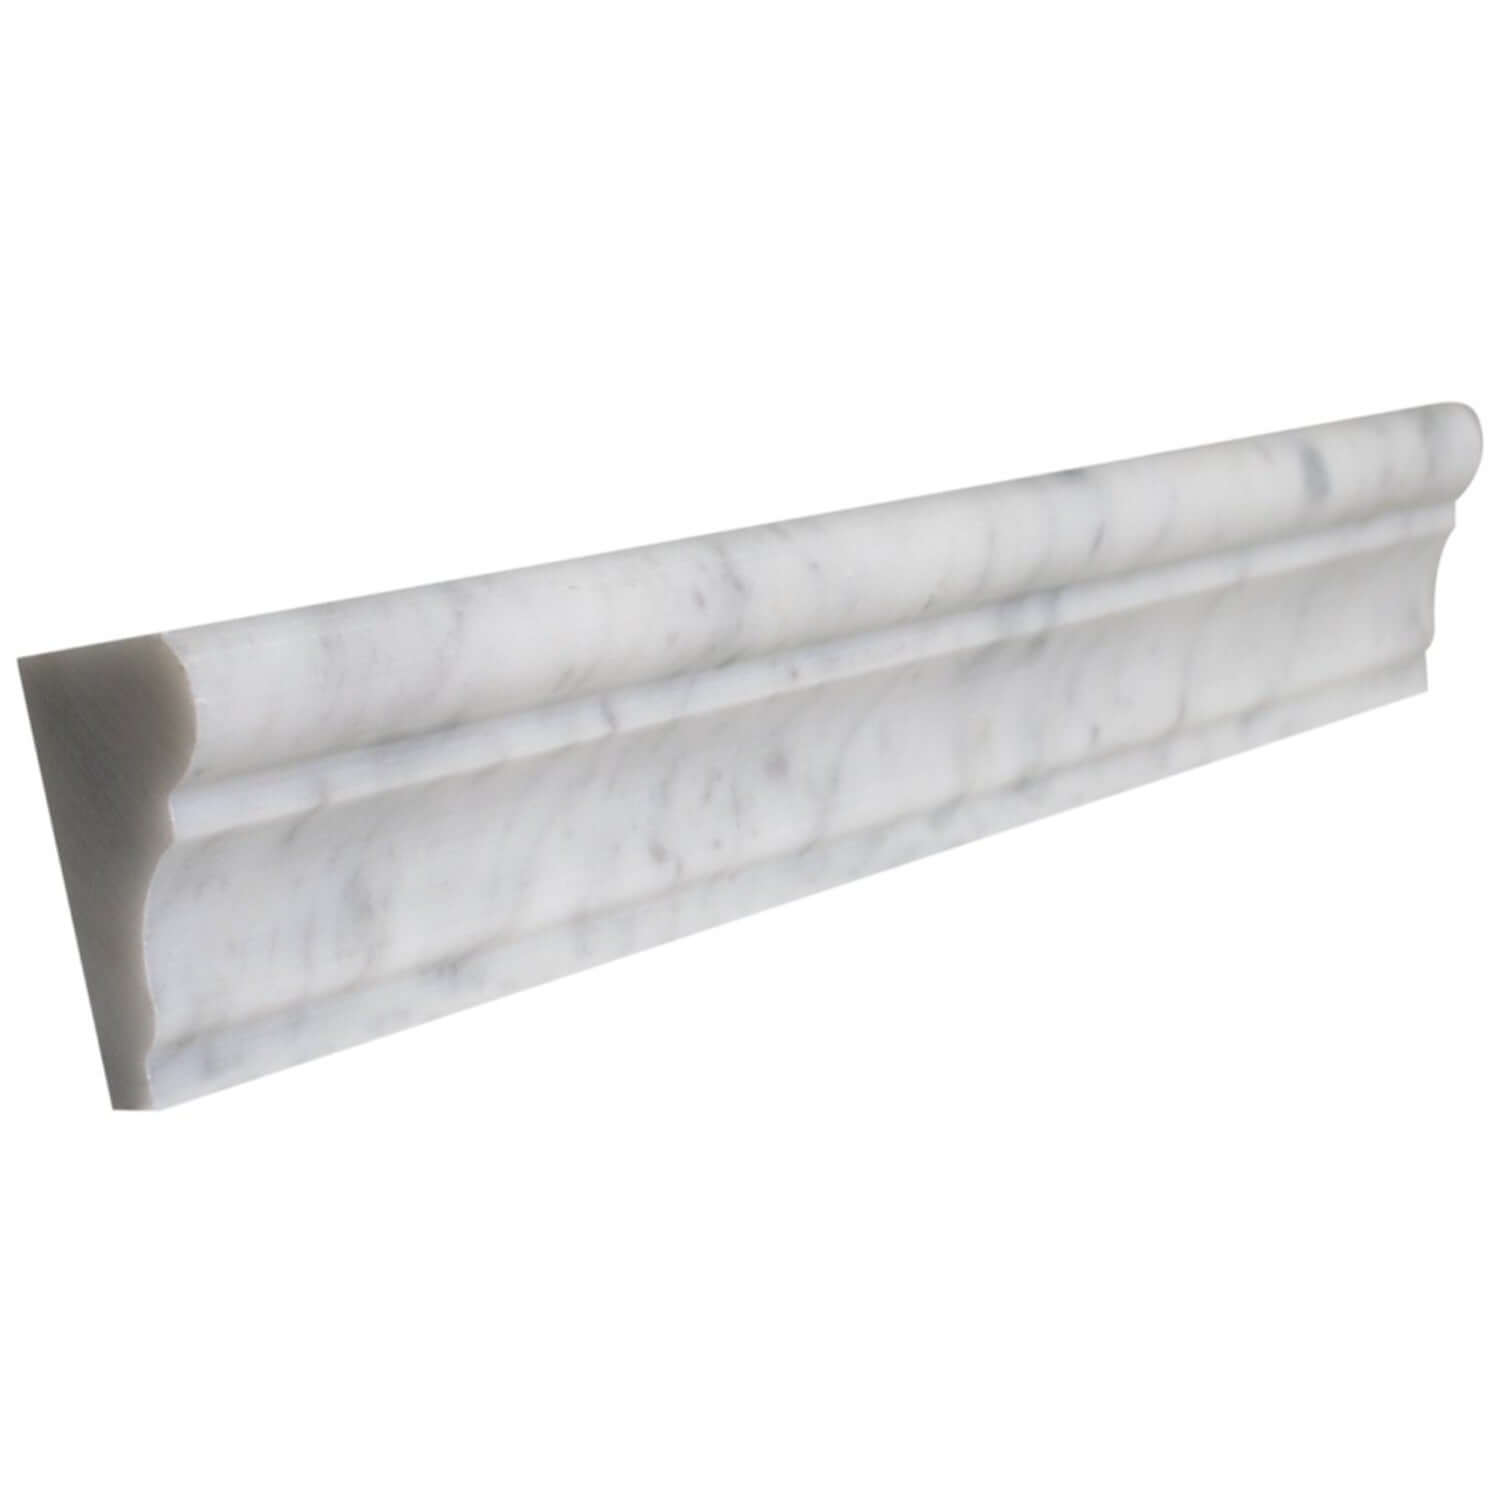 Arabescato Carrara Marble 2x12 Honed Crown Chair-Rail Moulding All Marble Tiles